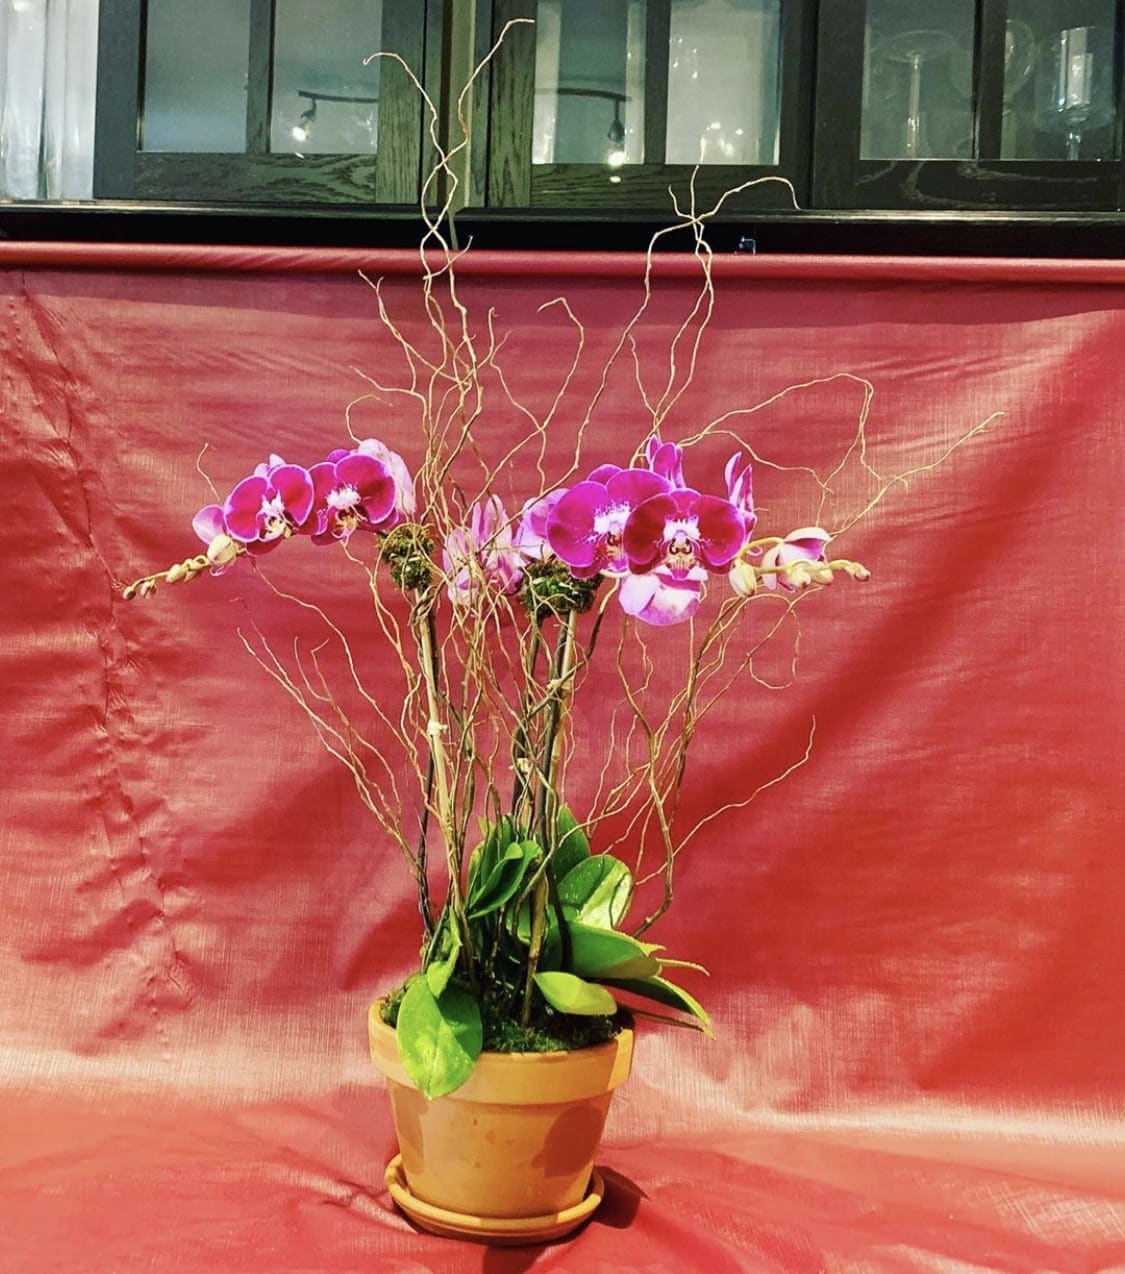 Custom purple phalaenopsis orchid planting with moss raffia, bamboo &amp; curly willow - Custom purple phalaenopsis orchid planting with moss raffia, bamboo &amp; curly willow in terracotta pot.  *Regular is triple stem *Deluxe has 4 stems